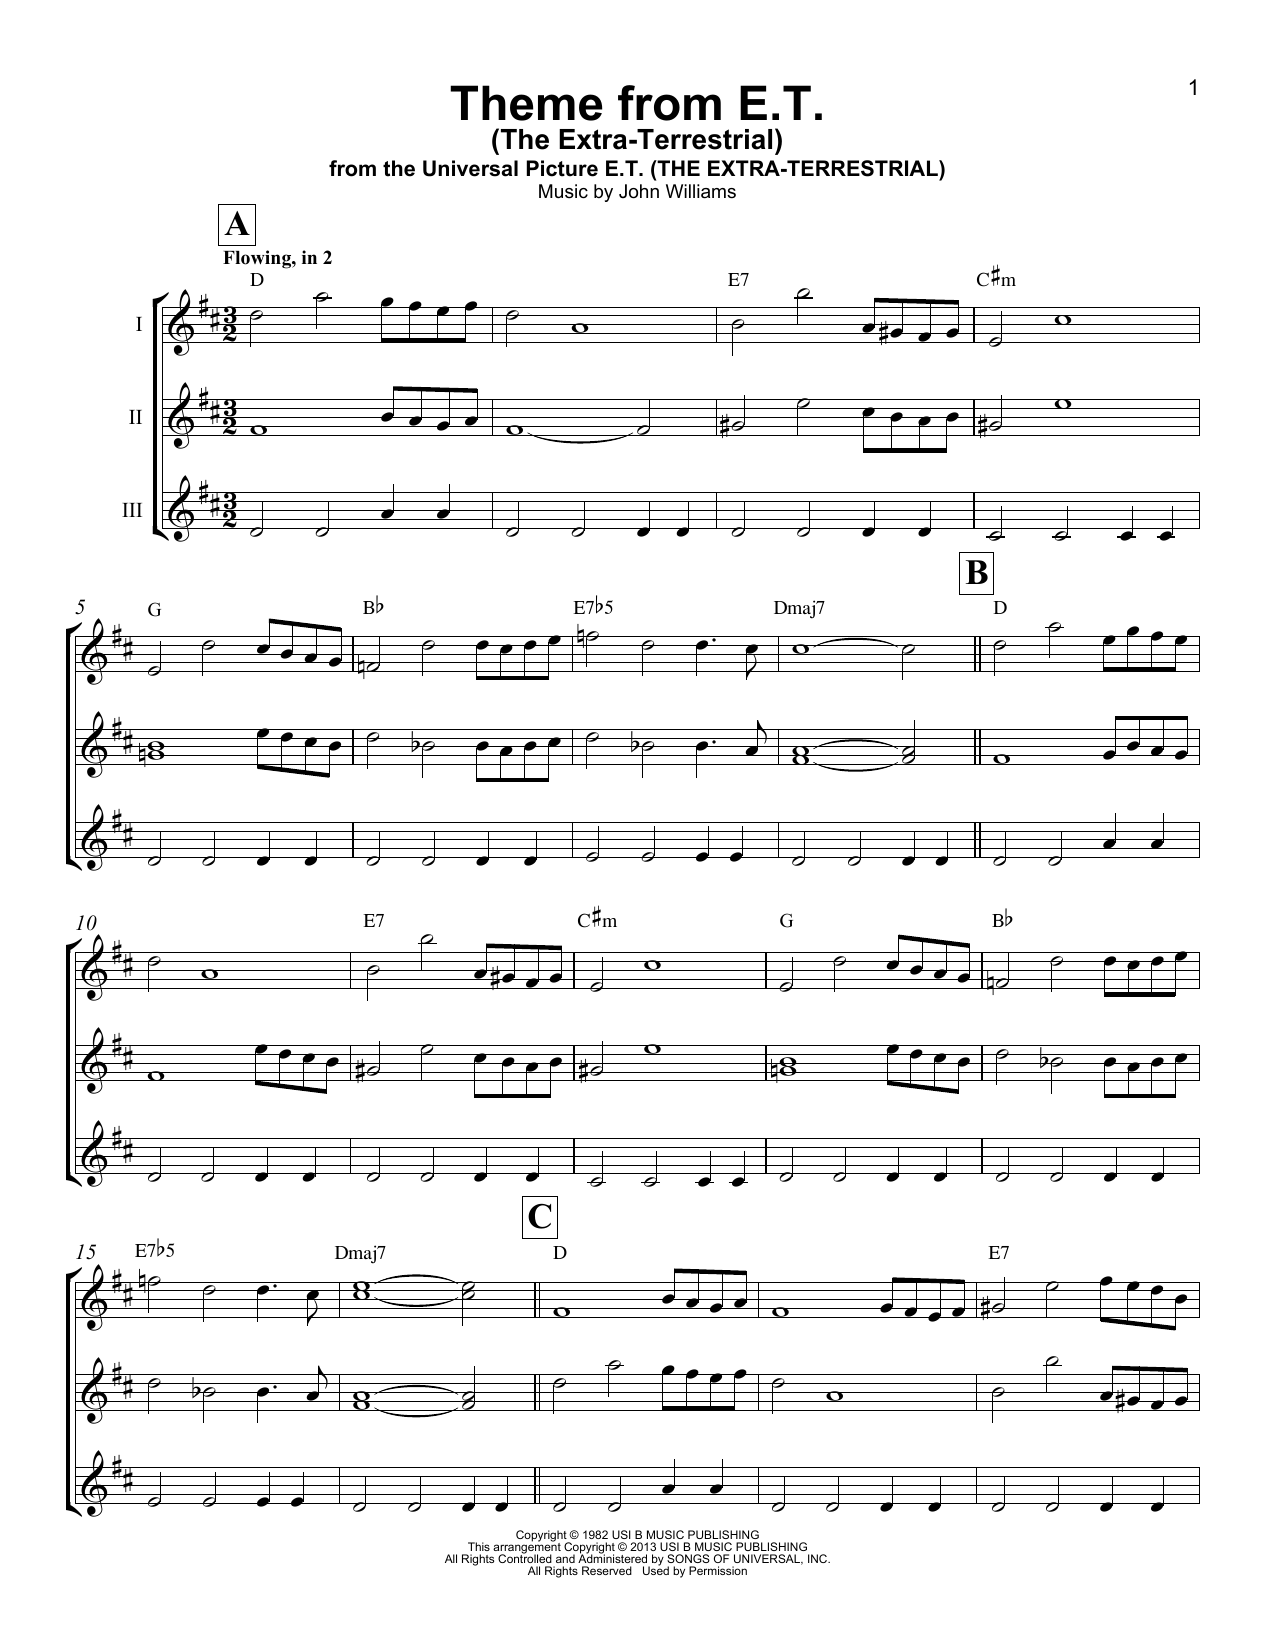 Download John Williams Theme From E.T. (The Extra-Terrestrial) Sheet Music